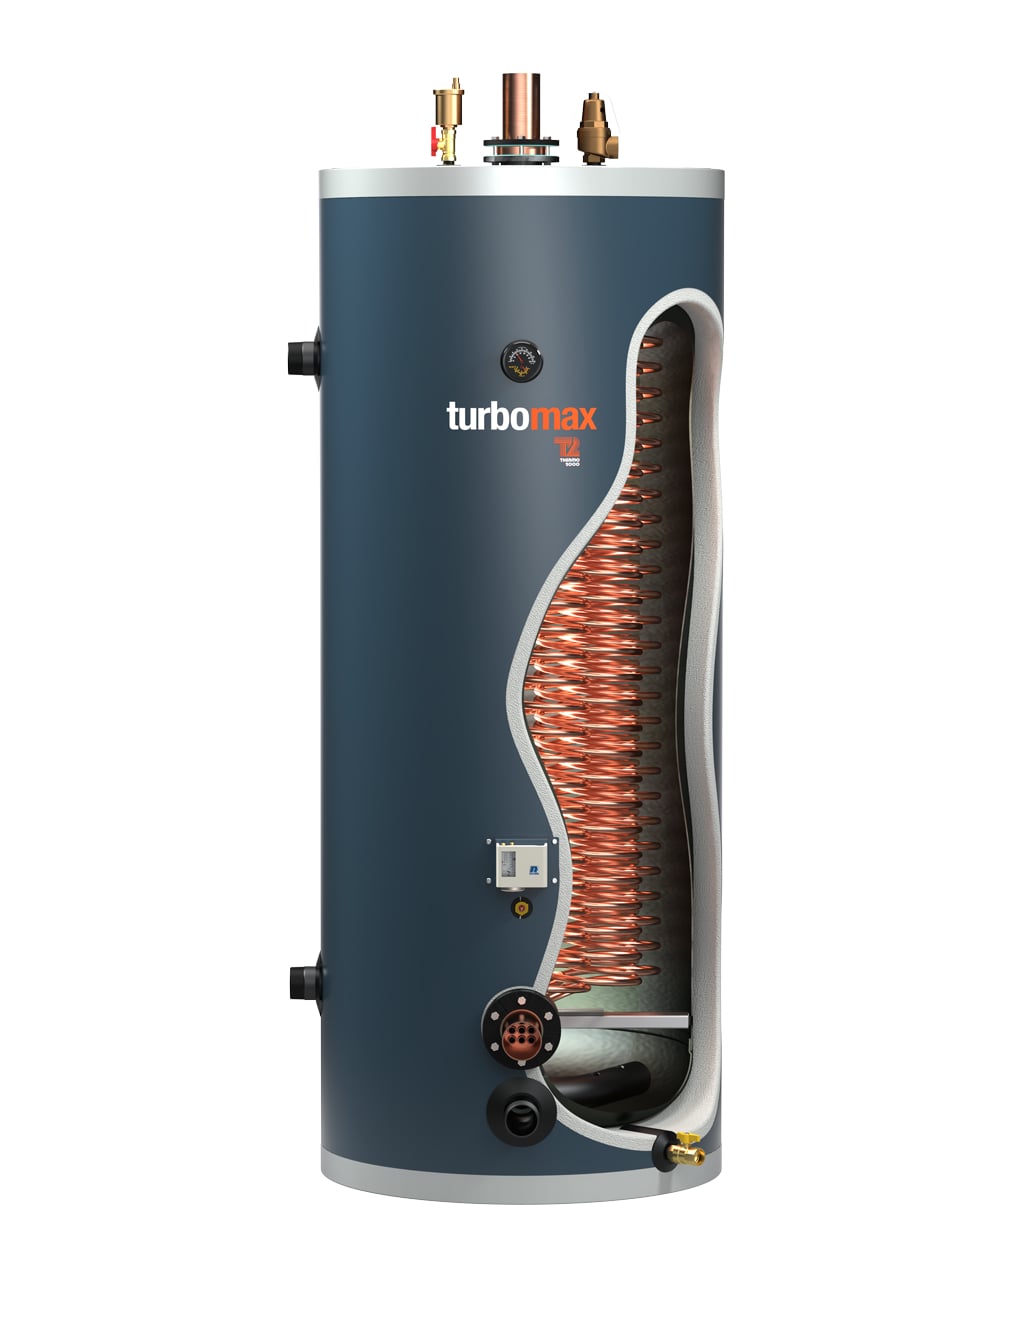 Thermo 2000 Turbomax Indirect Water Heater